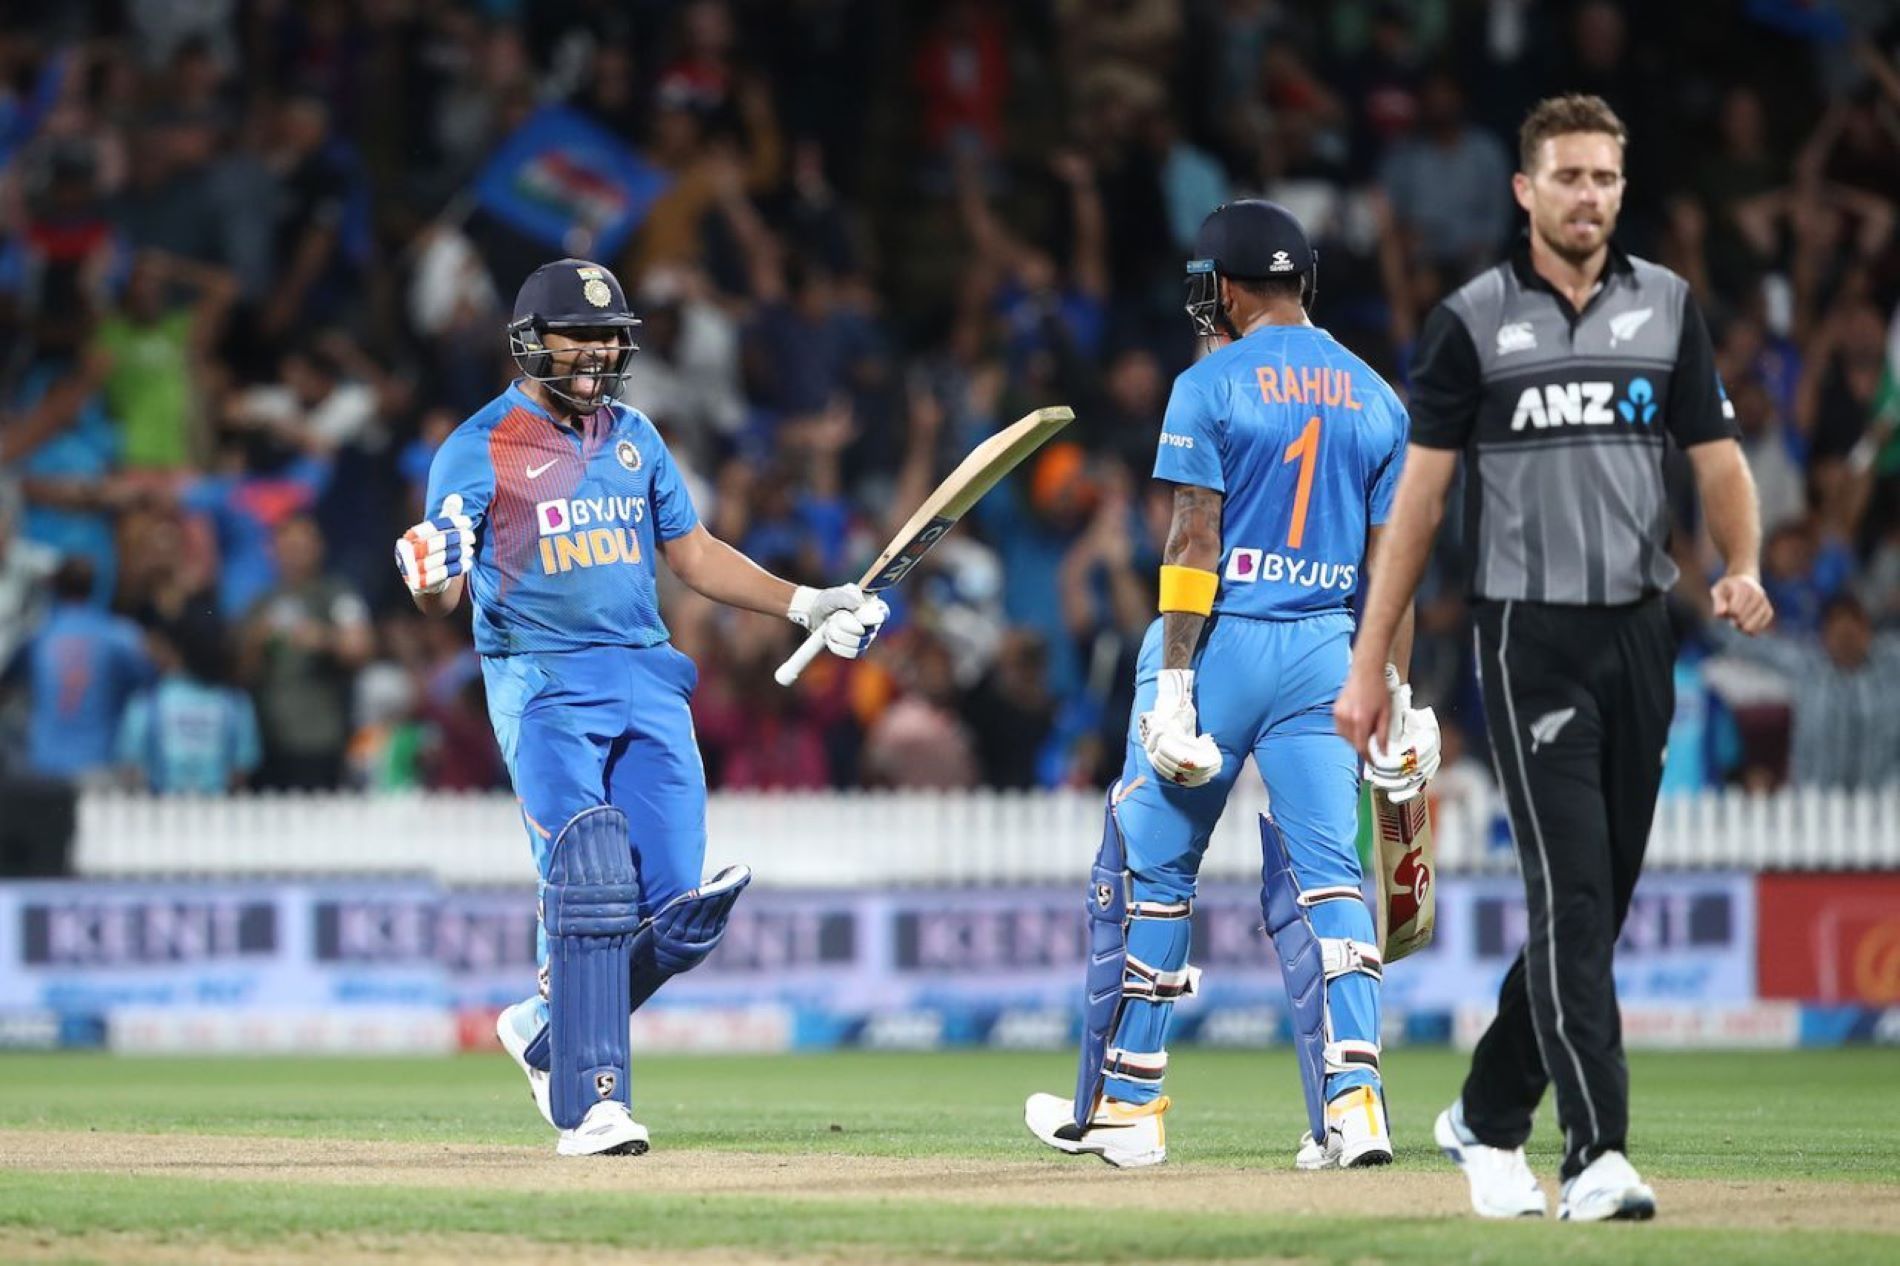 Rohit Sharma and KL Rahul helped seal a dramatic win for India in the Super Over.